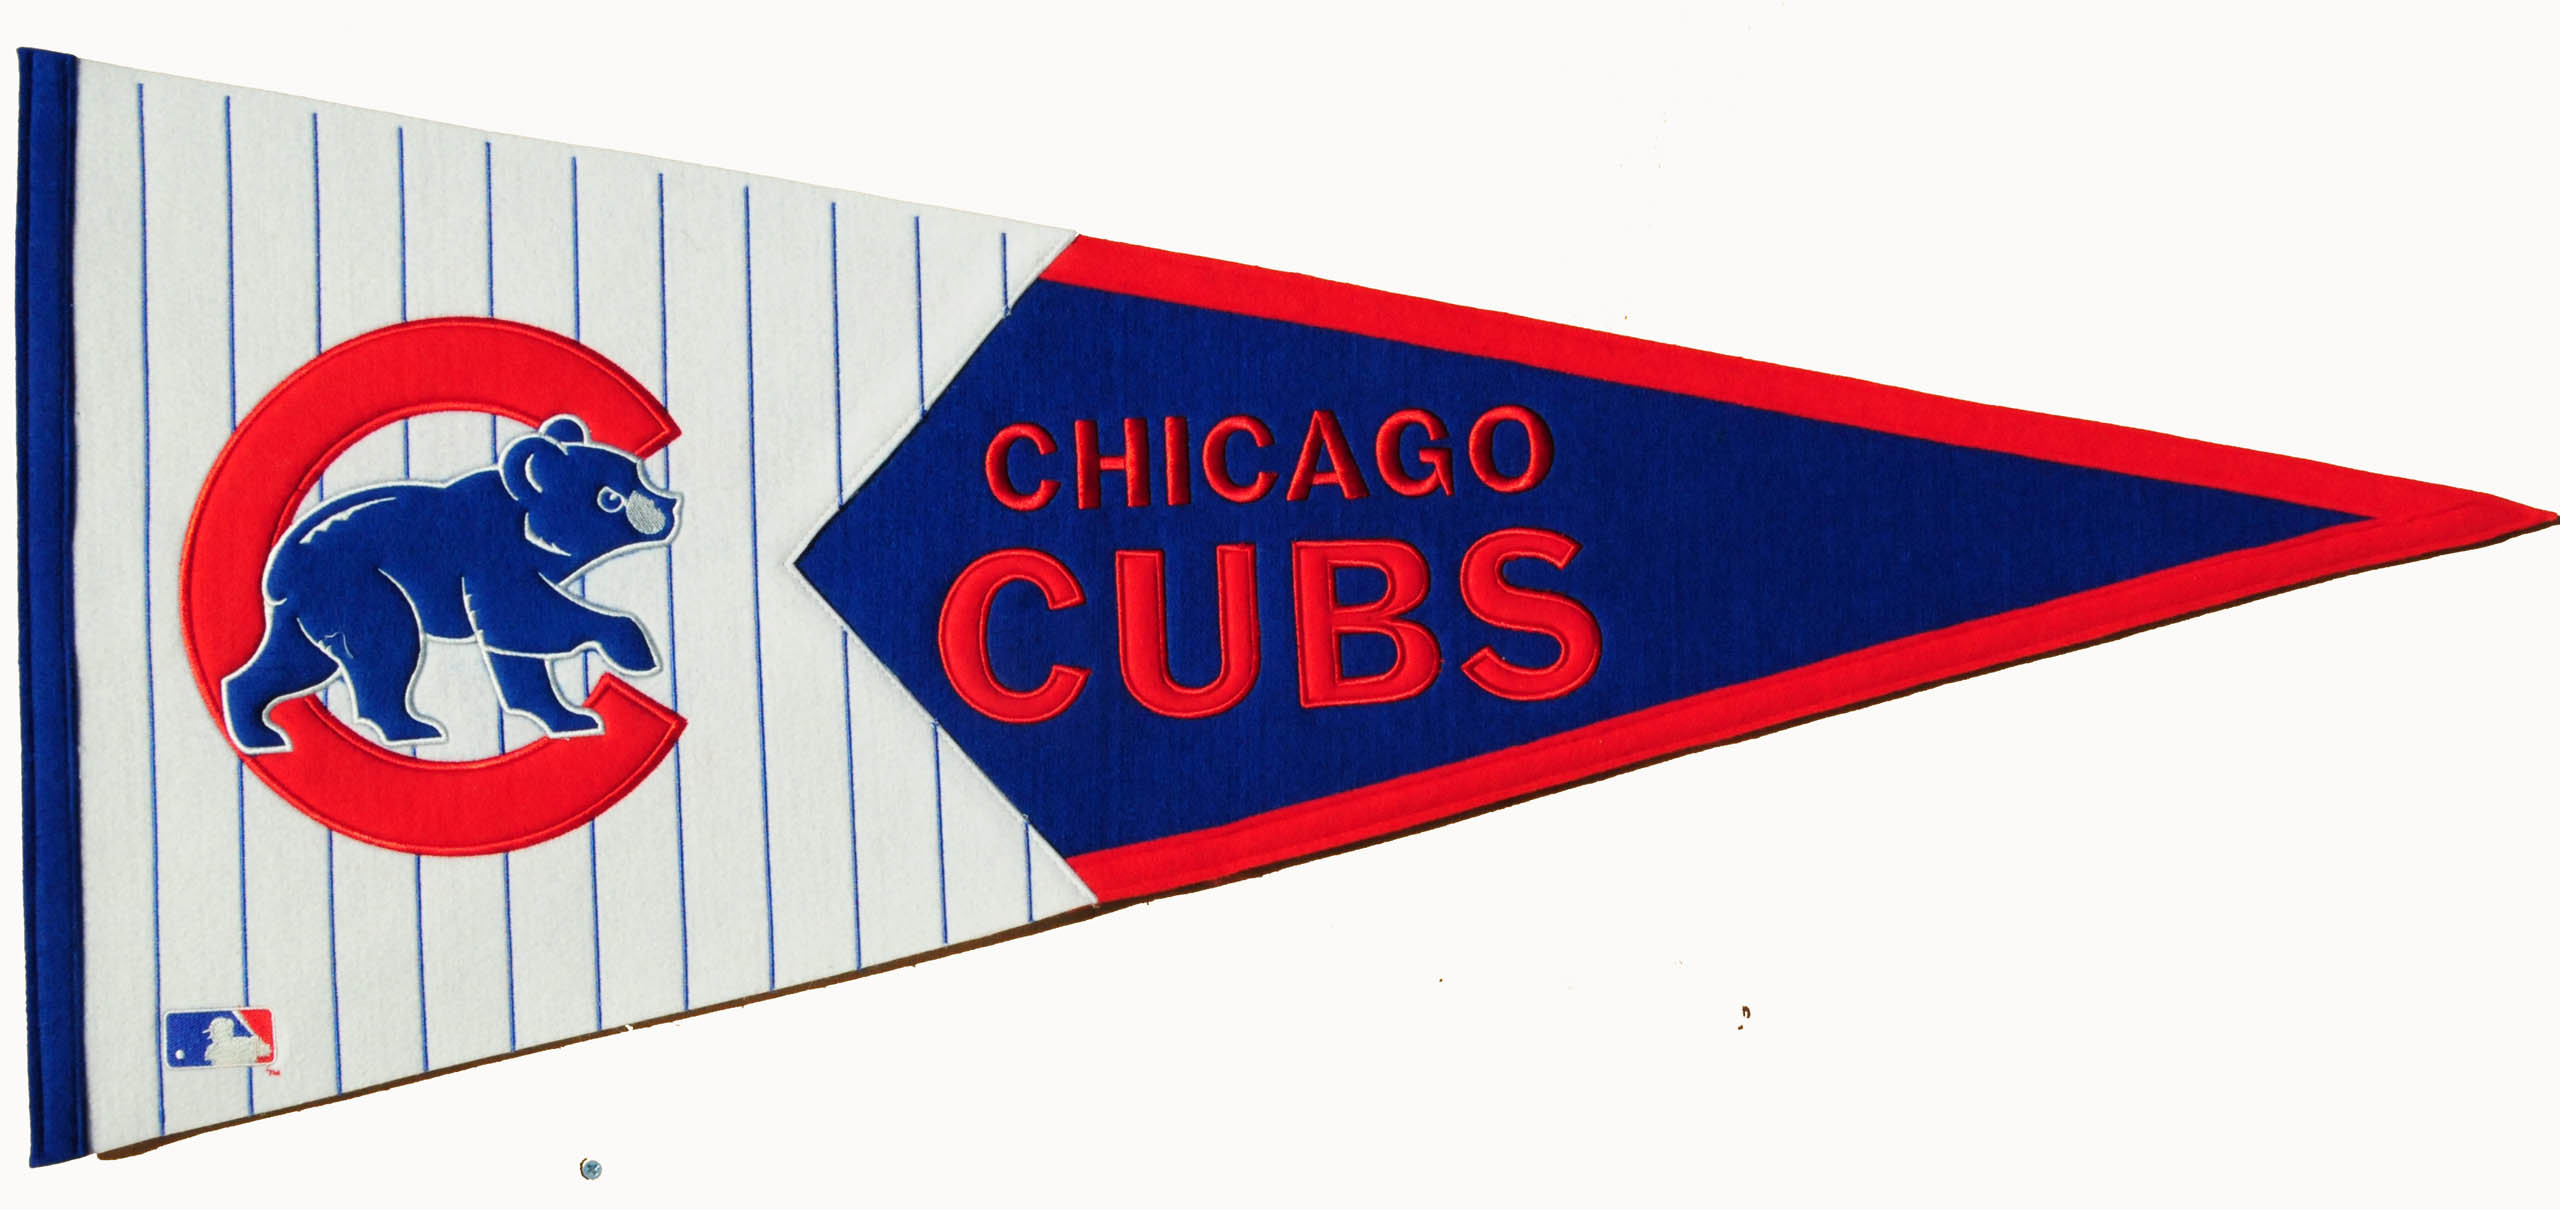 2560x1210 Chicago Cubs Wallpapers for Desktop – Daily Backgrounds in HD .